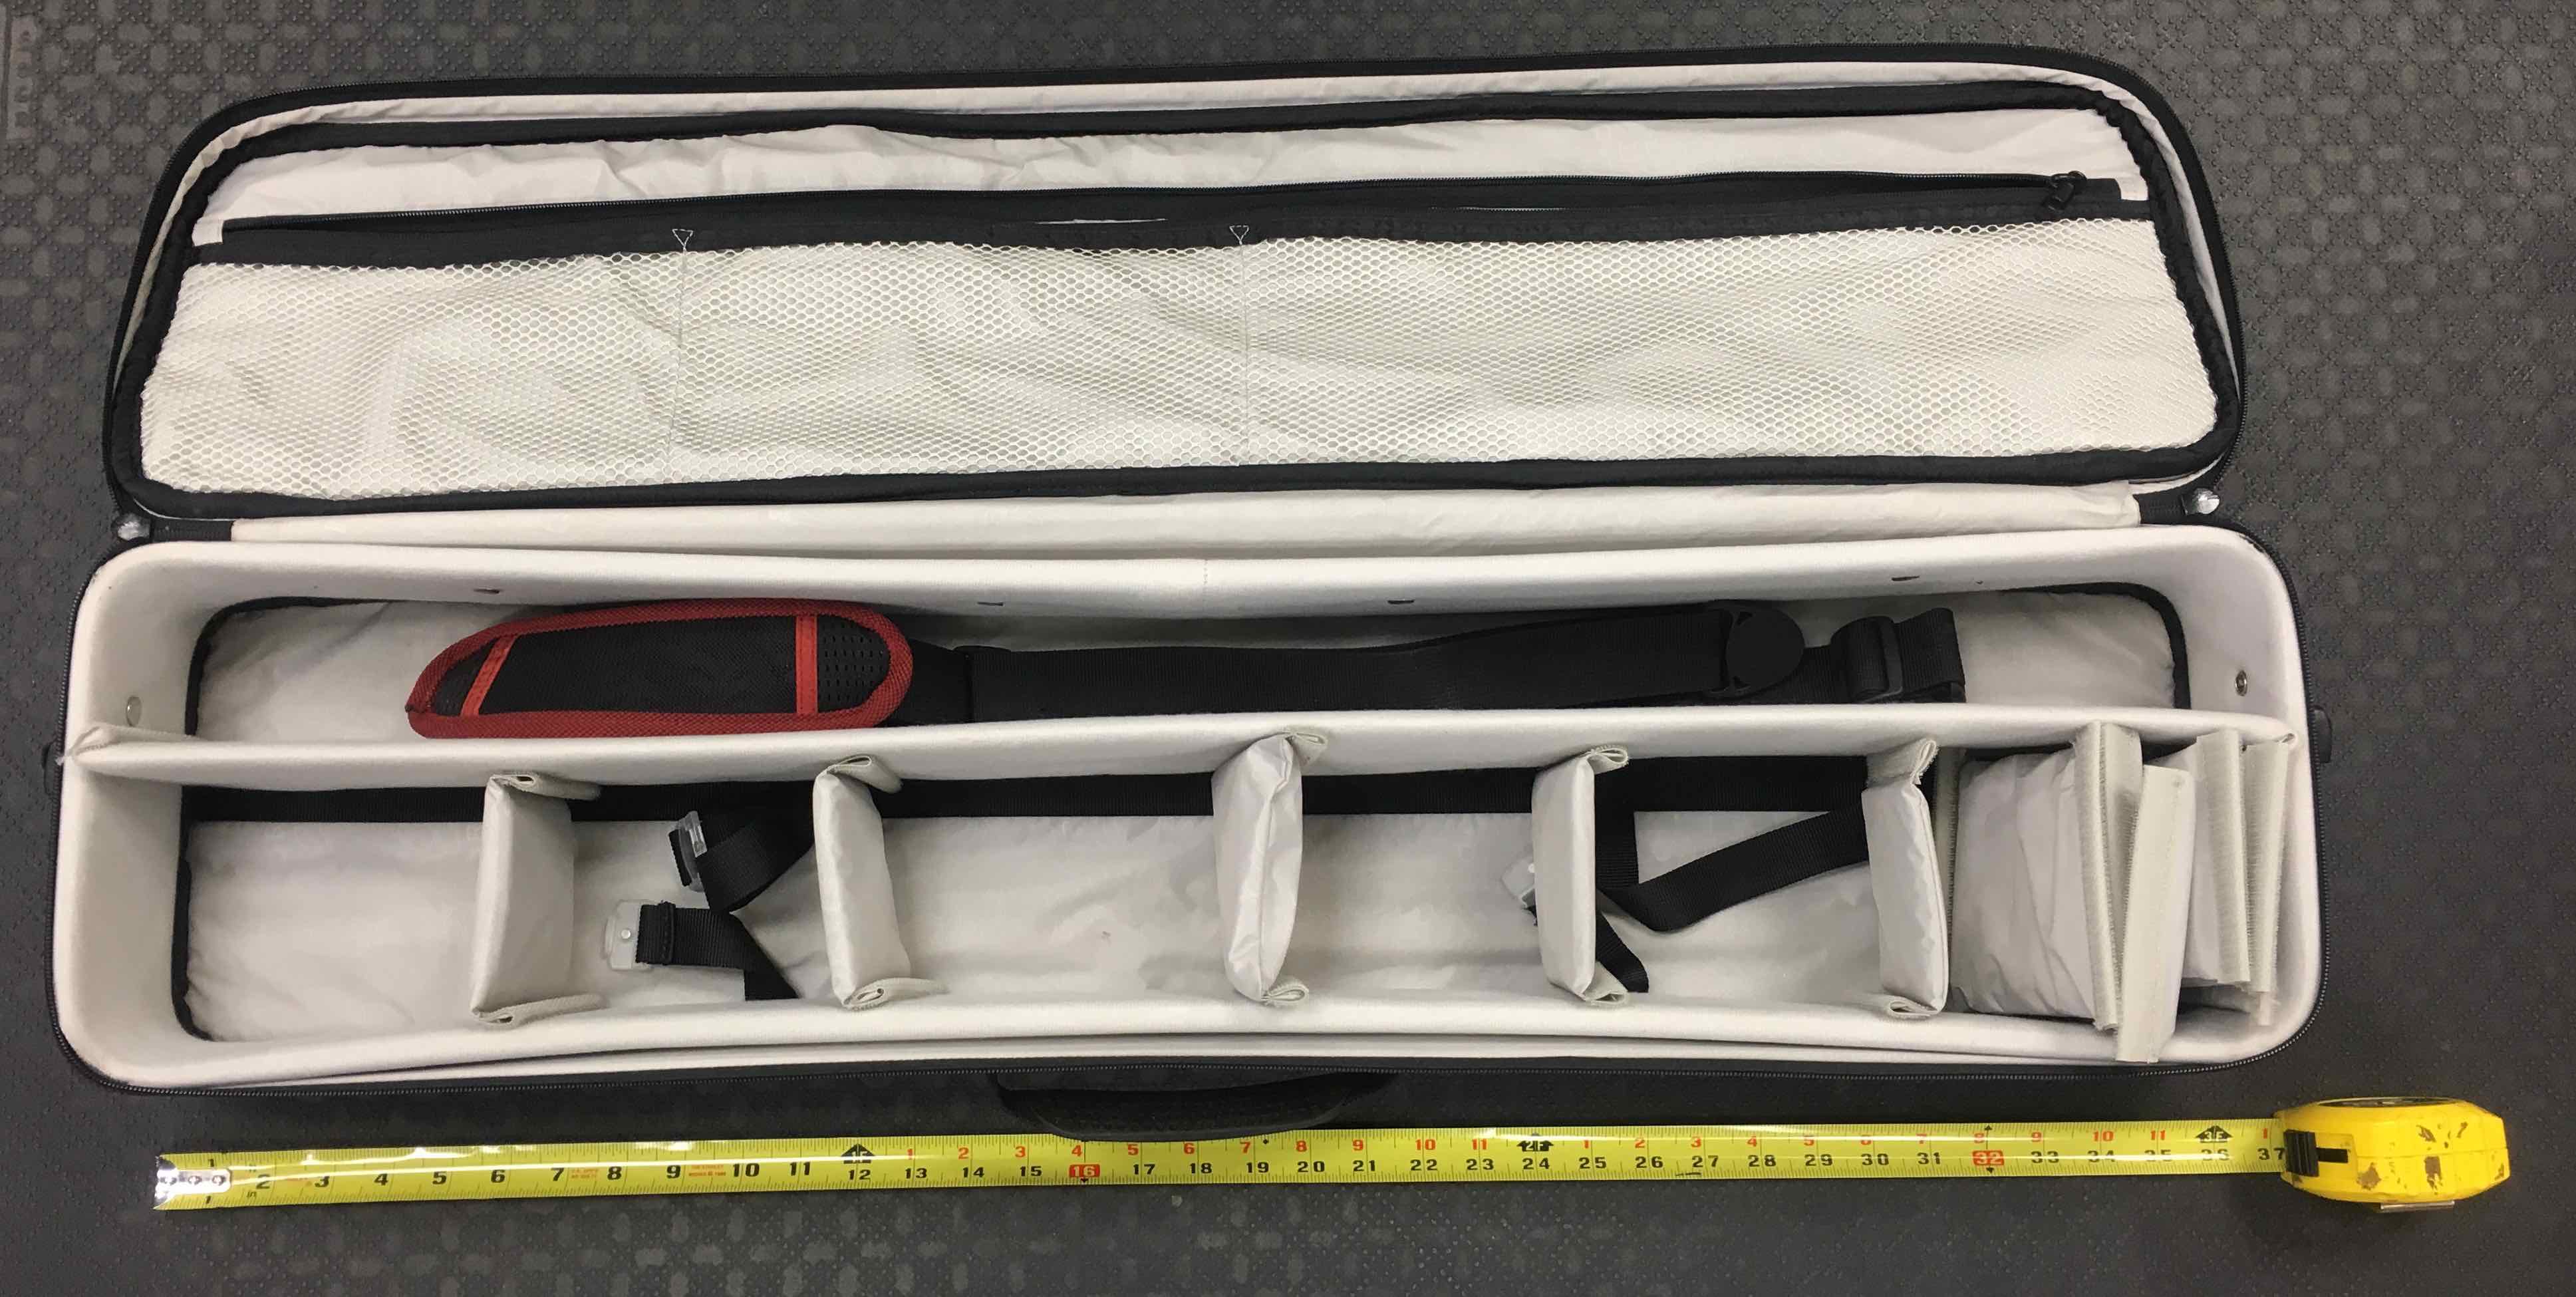 SOLD! – Orvis 36” Rod & Reel Case for 9′ 4pc Fly Rods – GOOD SHAPE